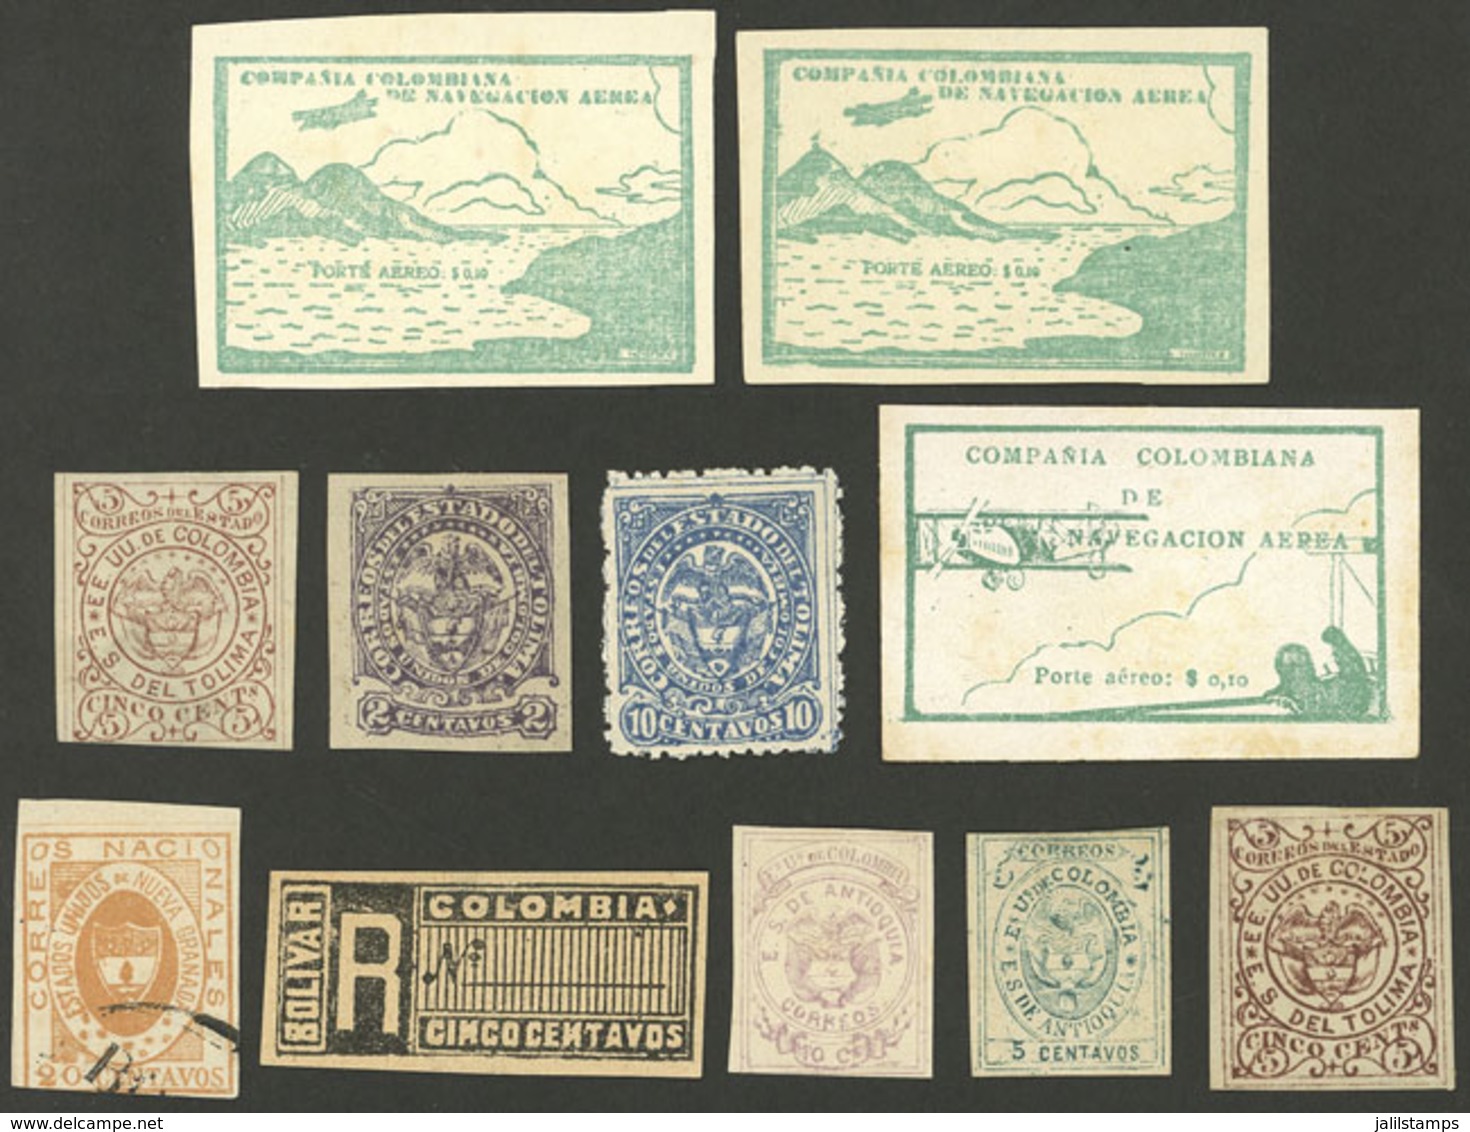 COLOMBIA: Lot Of Old Stamps, Probably All Are FORGERIES Or Reprints, Very Good Lot For The Specialist! - Colombia